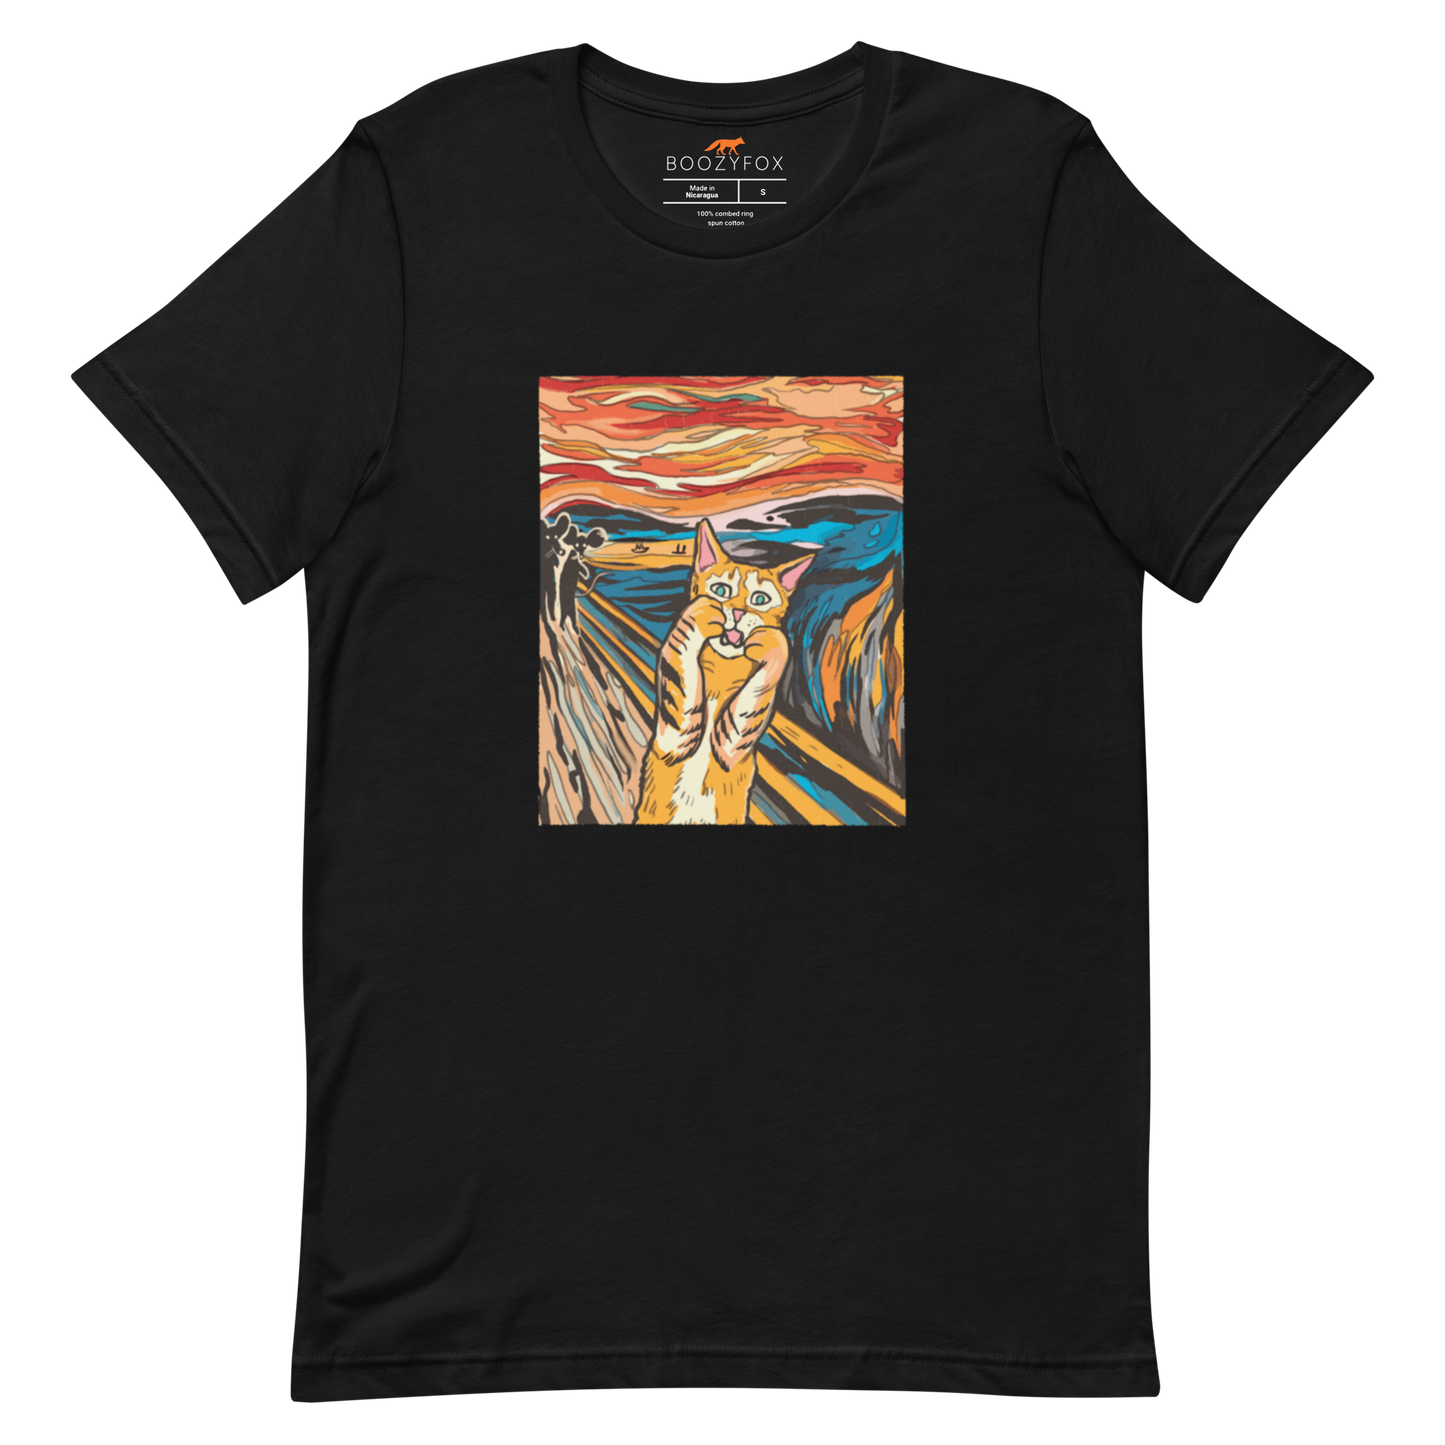 Black Premium Screaming Cat T-Shirt showcasing iconic The Screaming Cat graphic on the chest - Funny Graphic Cat Tees - Boozy Fox